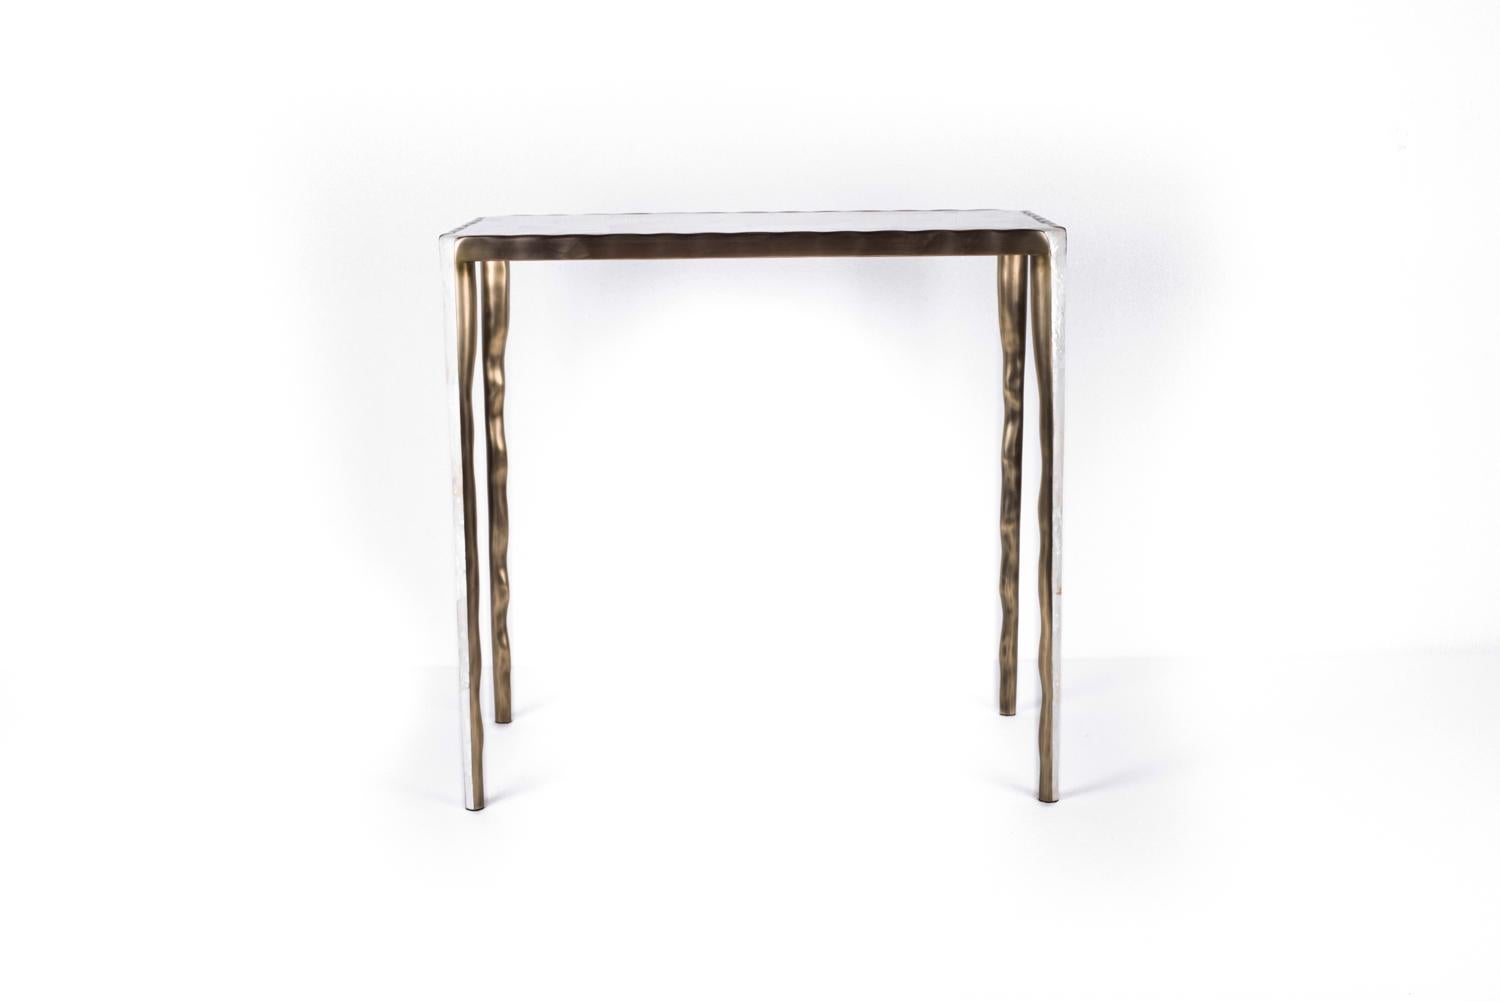 The Melting Nesting Side Table in Large is part of a series of nesting side tables (sold separately) . One can purchase the tables on their own or buy them as a set to create elegant & geometric shapes. This piece is inlaid in mother of pearl and